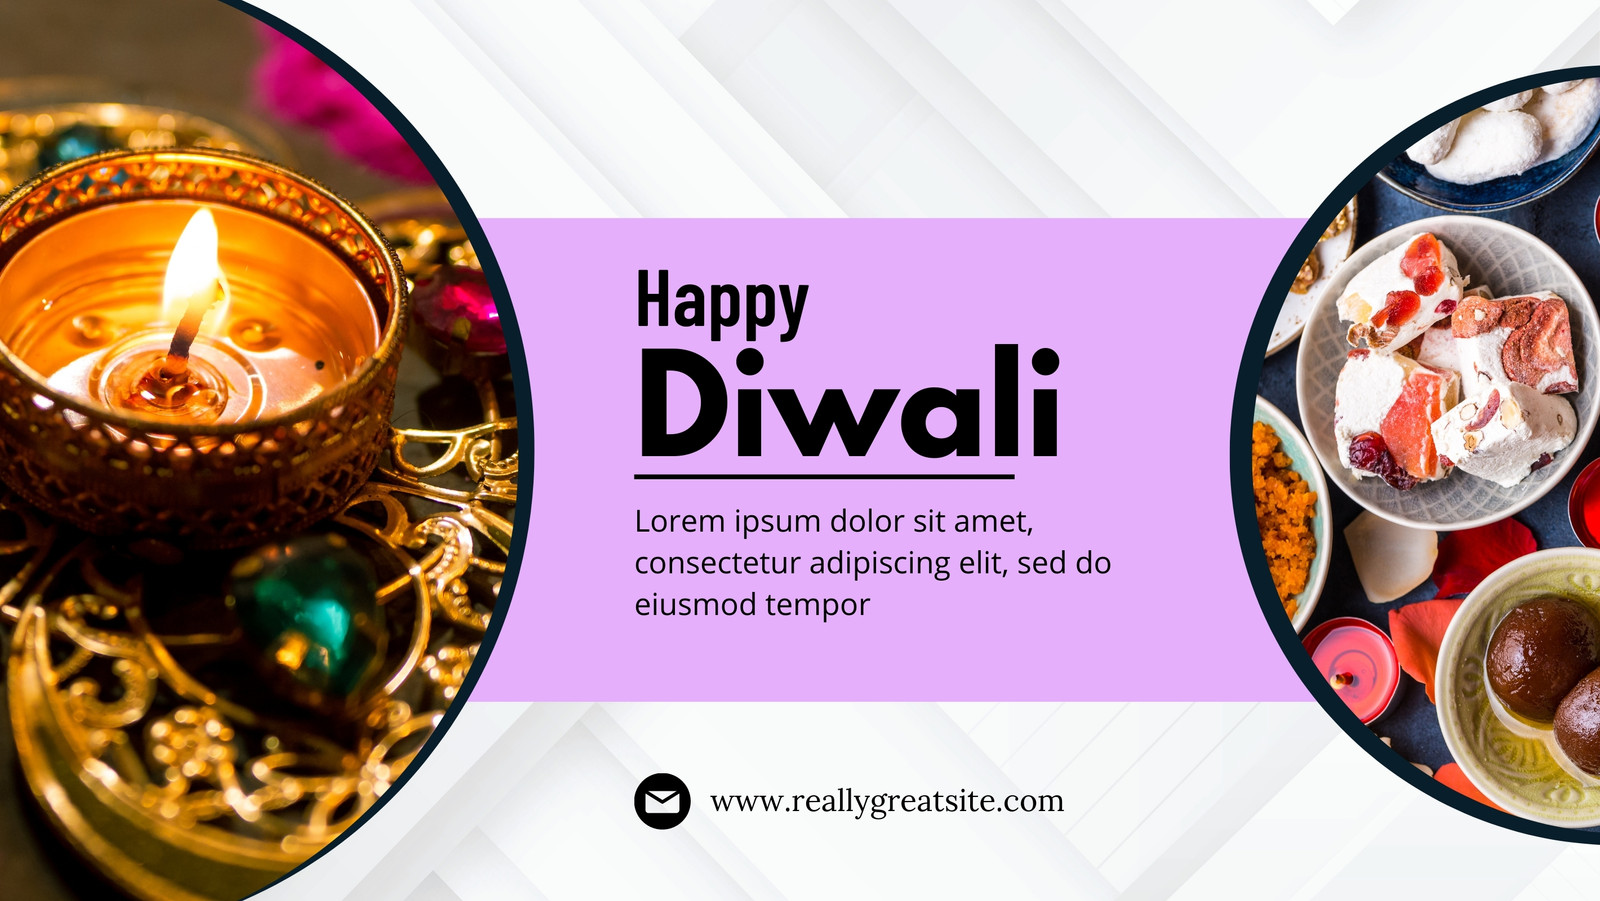 Page 3 - Free and customizable diwali templates